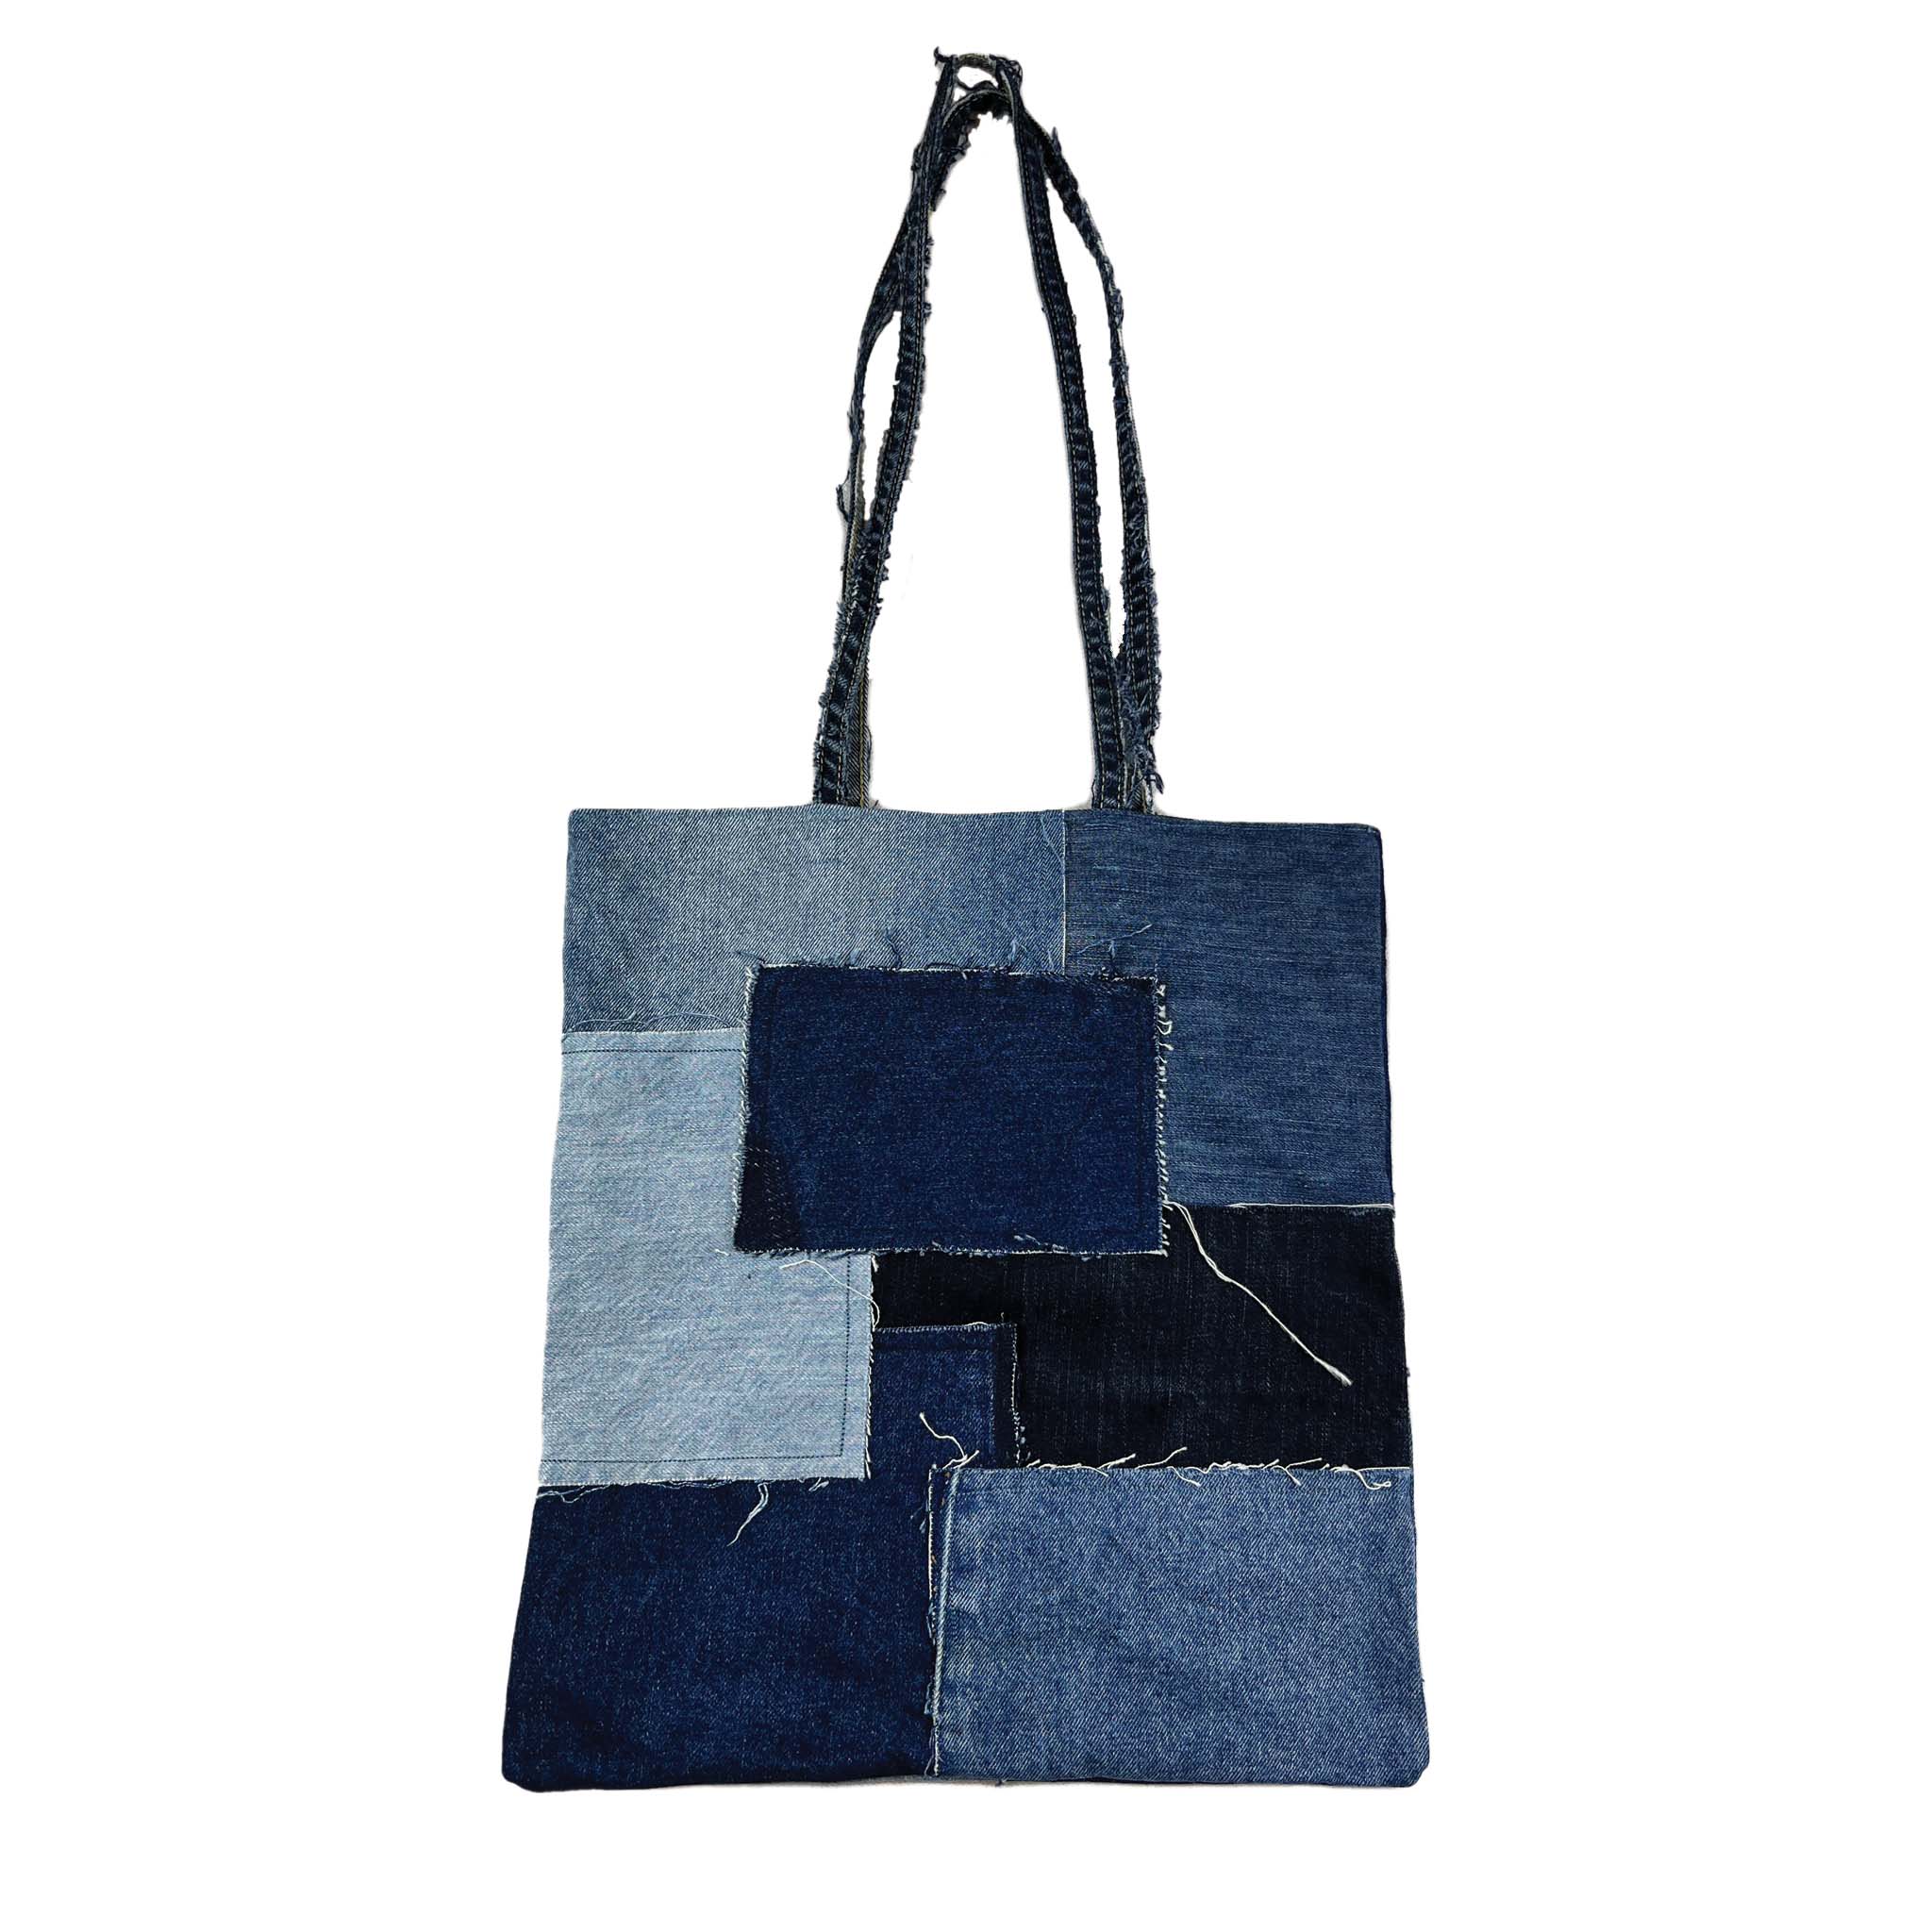 Handmade Reversible Patched Denim Tote Bag - Etsy